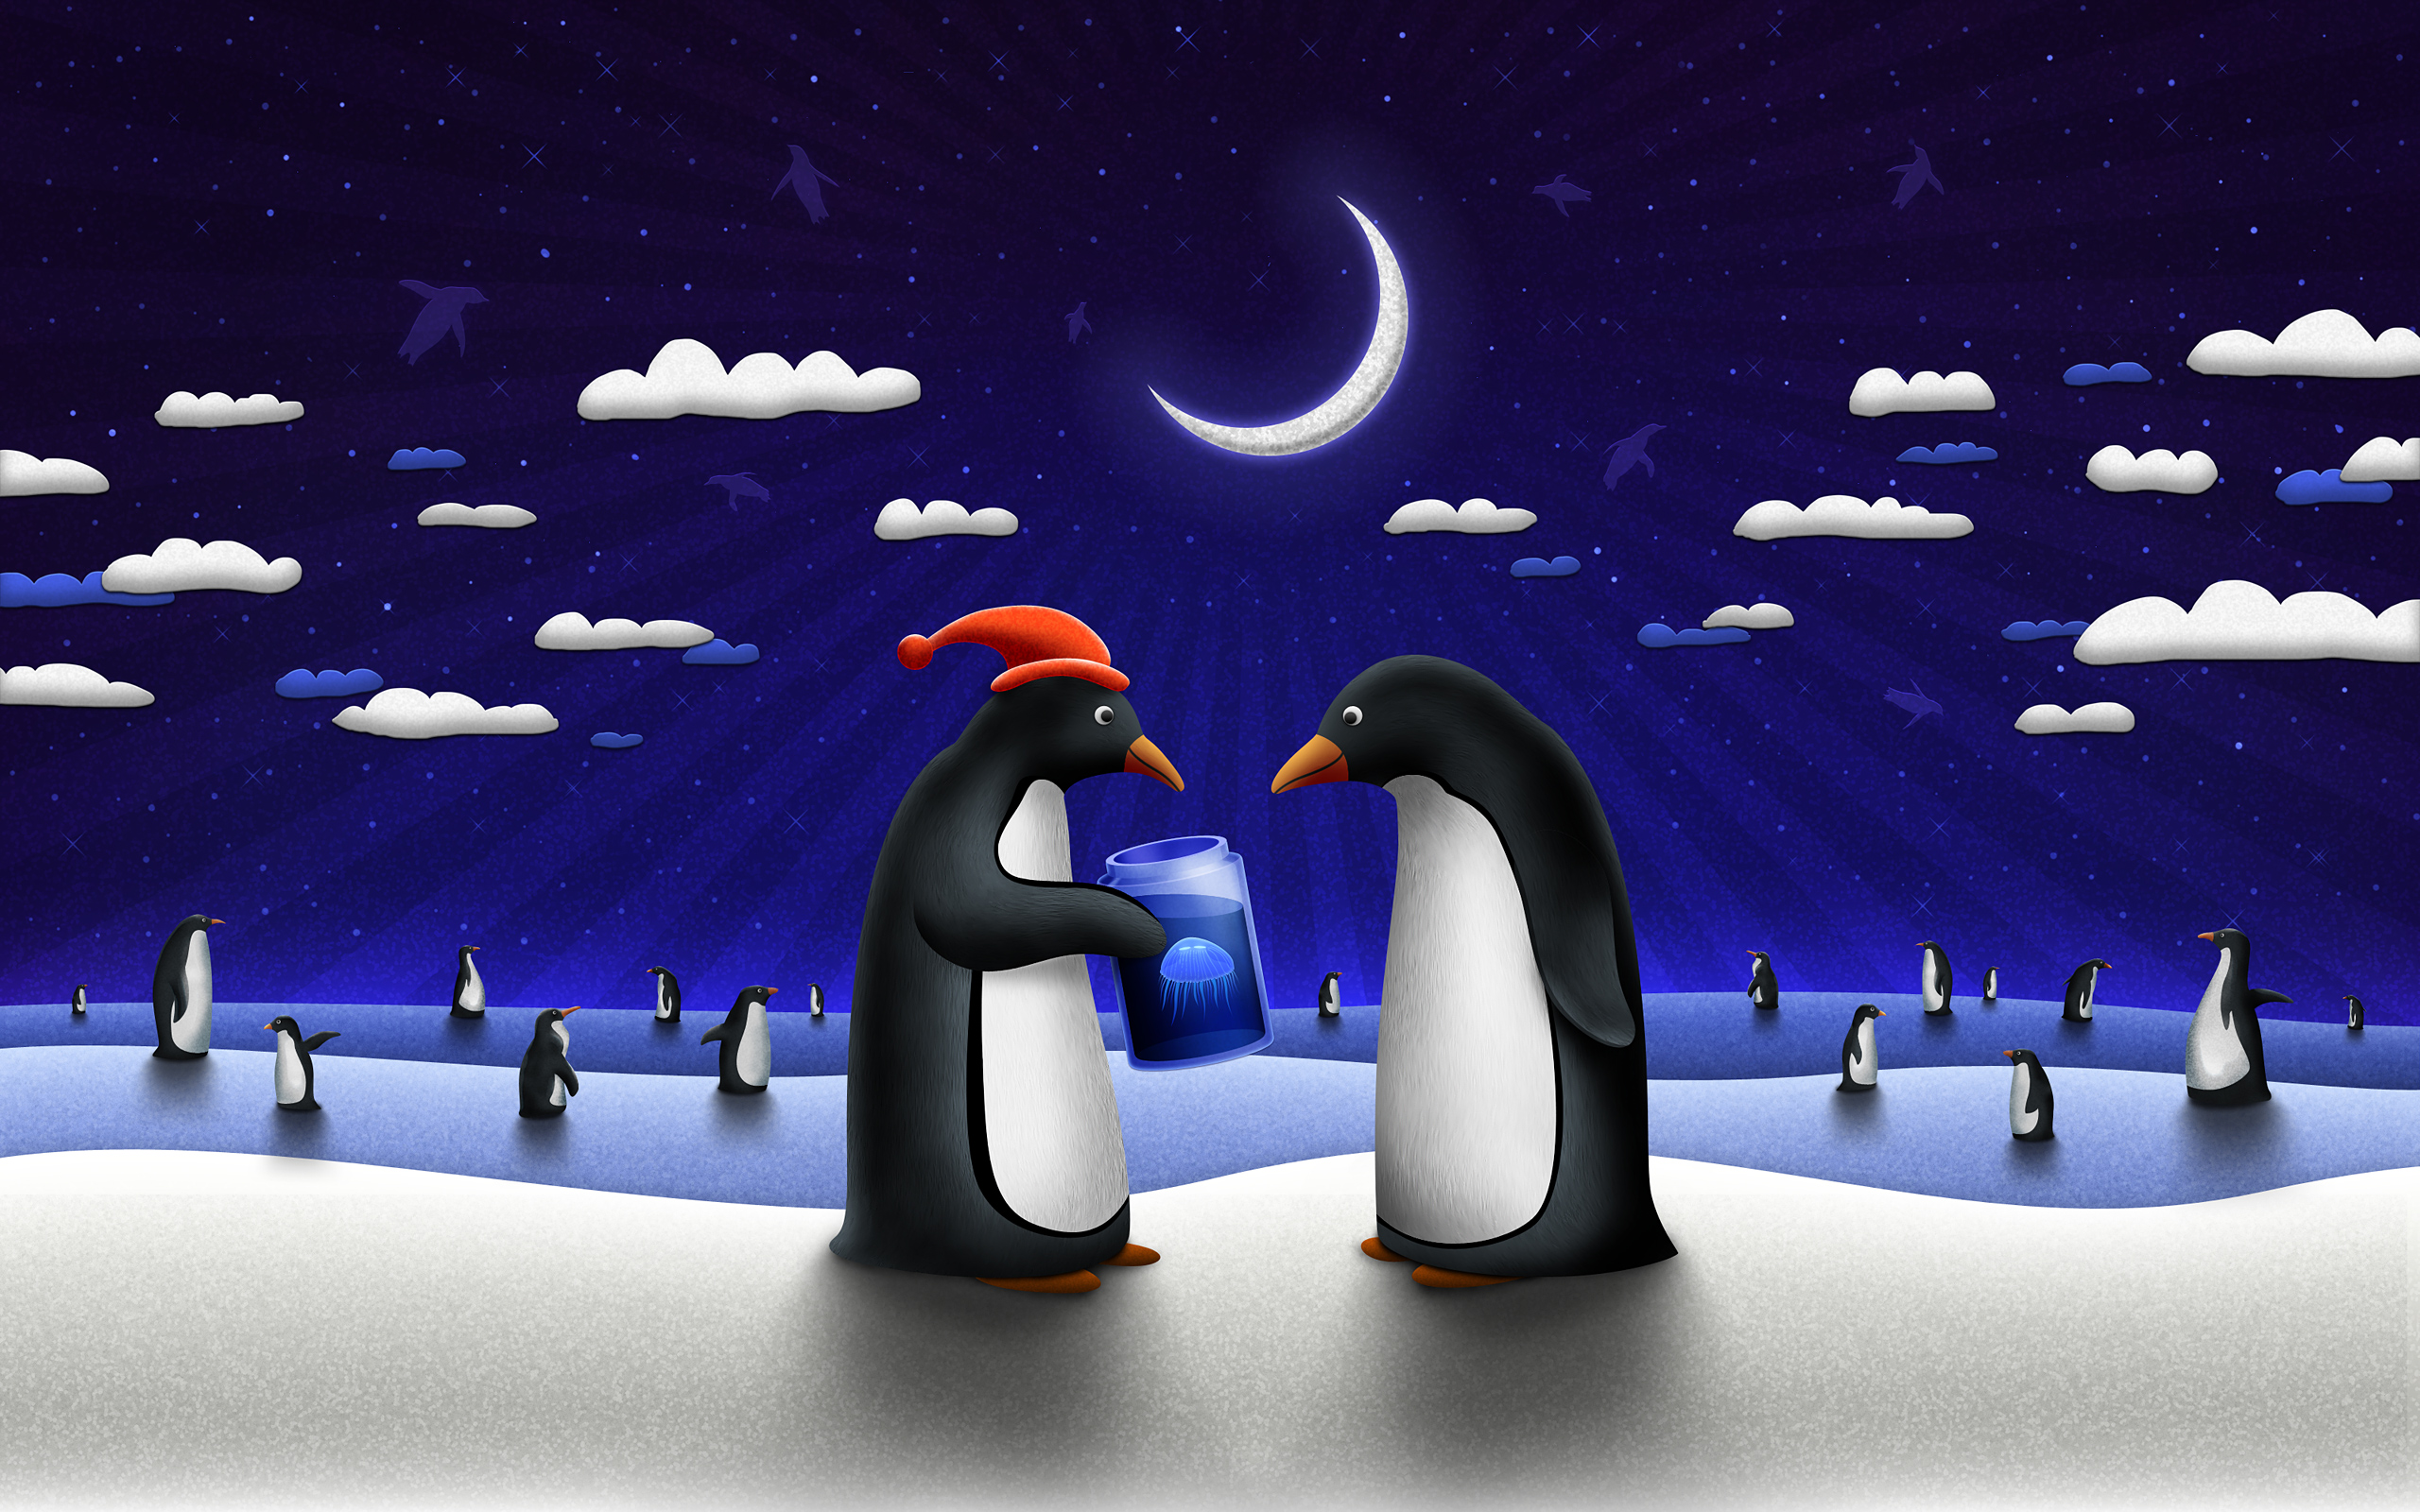 Free_Scenery_Wallpaper__Penguins_Sending_Gift_and_Making_Wishes_for_Christmas_What_About_You.jpg